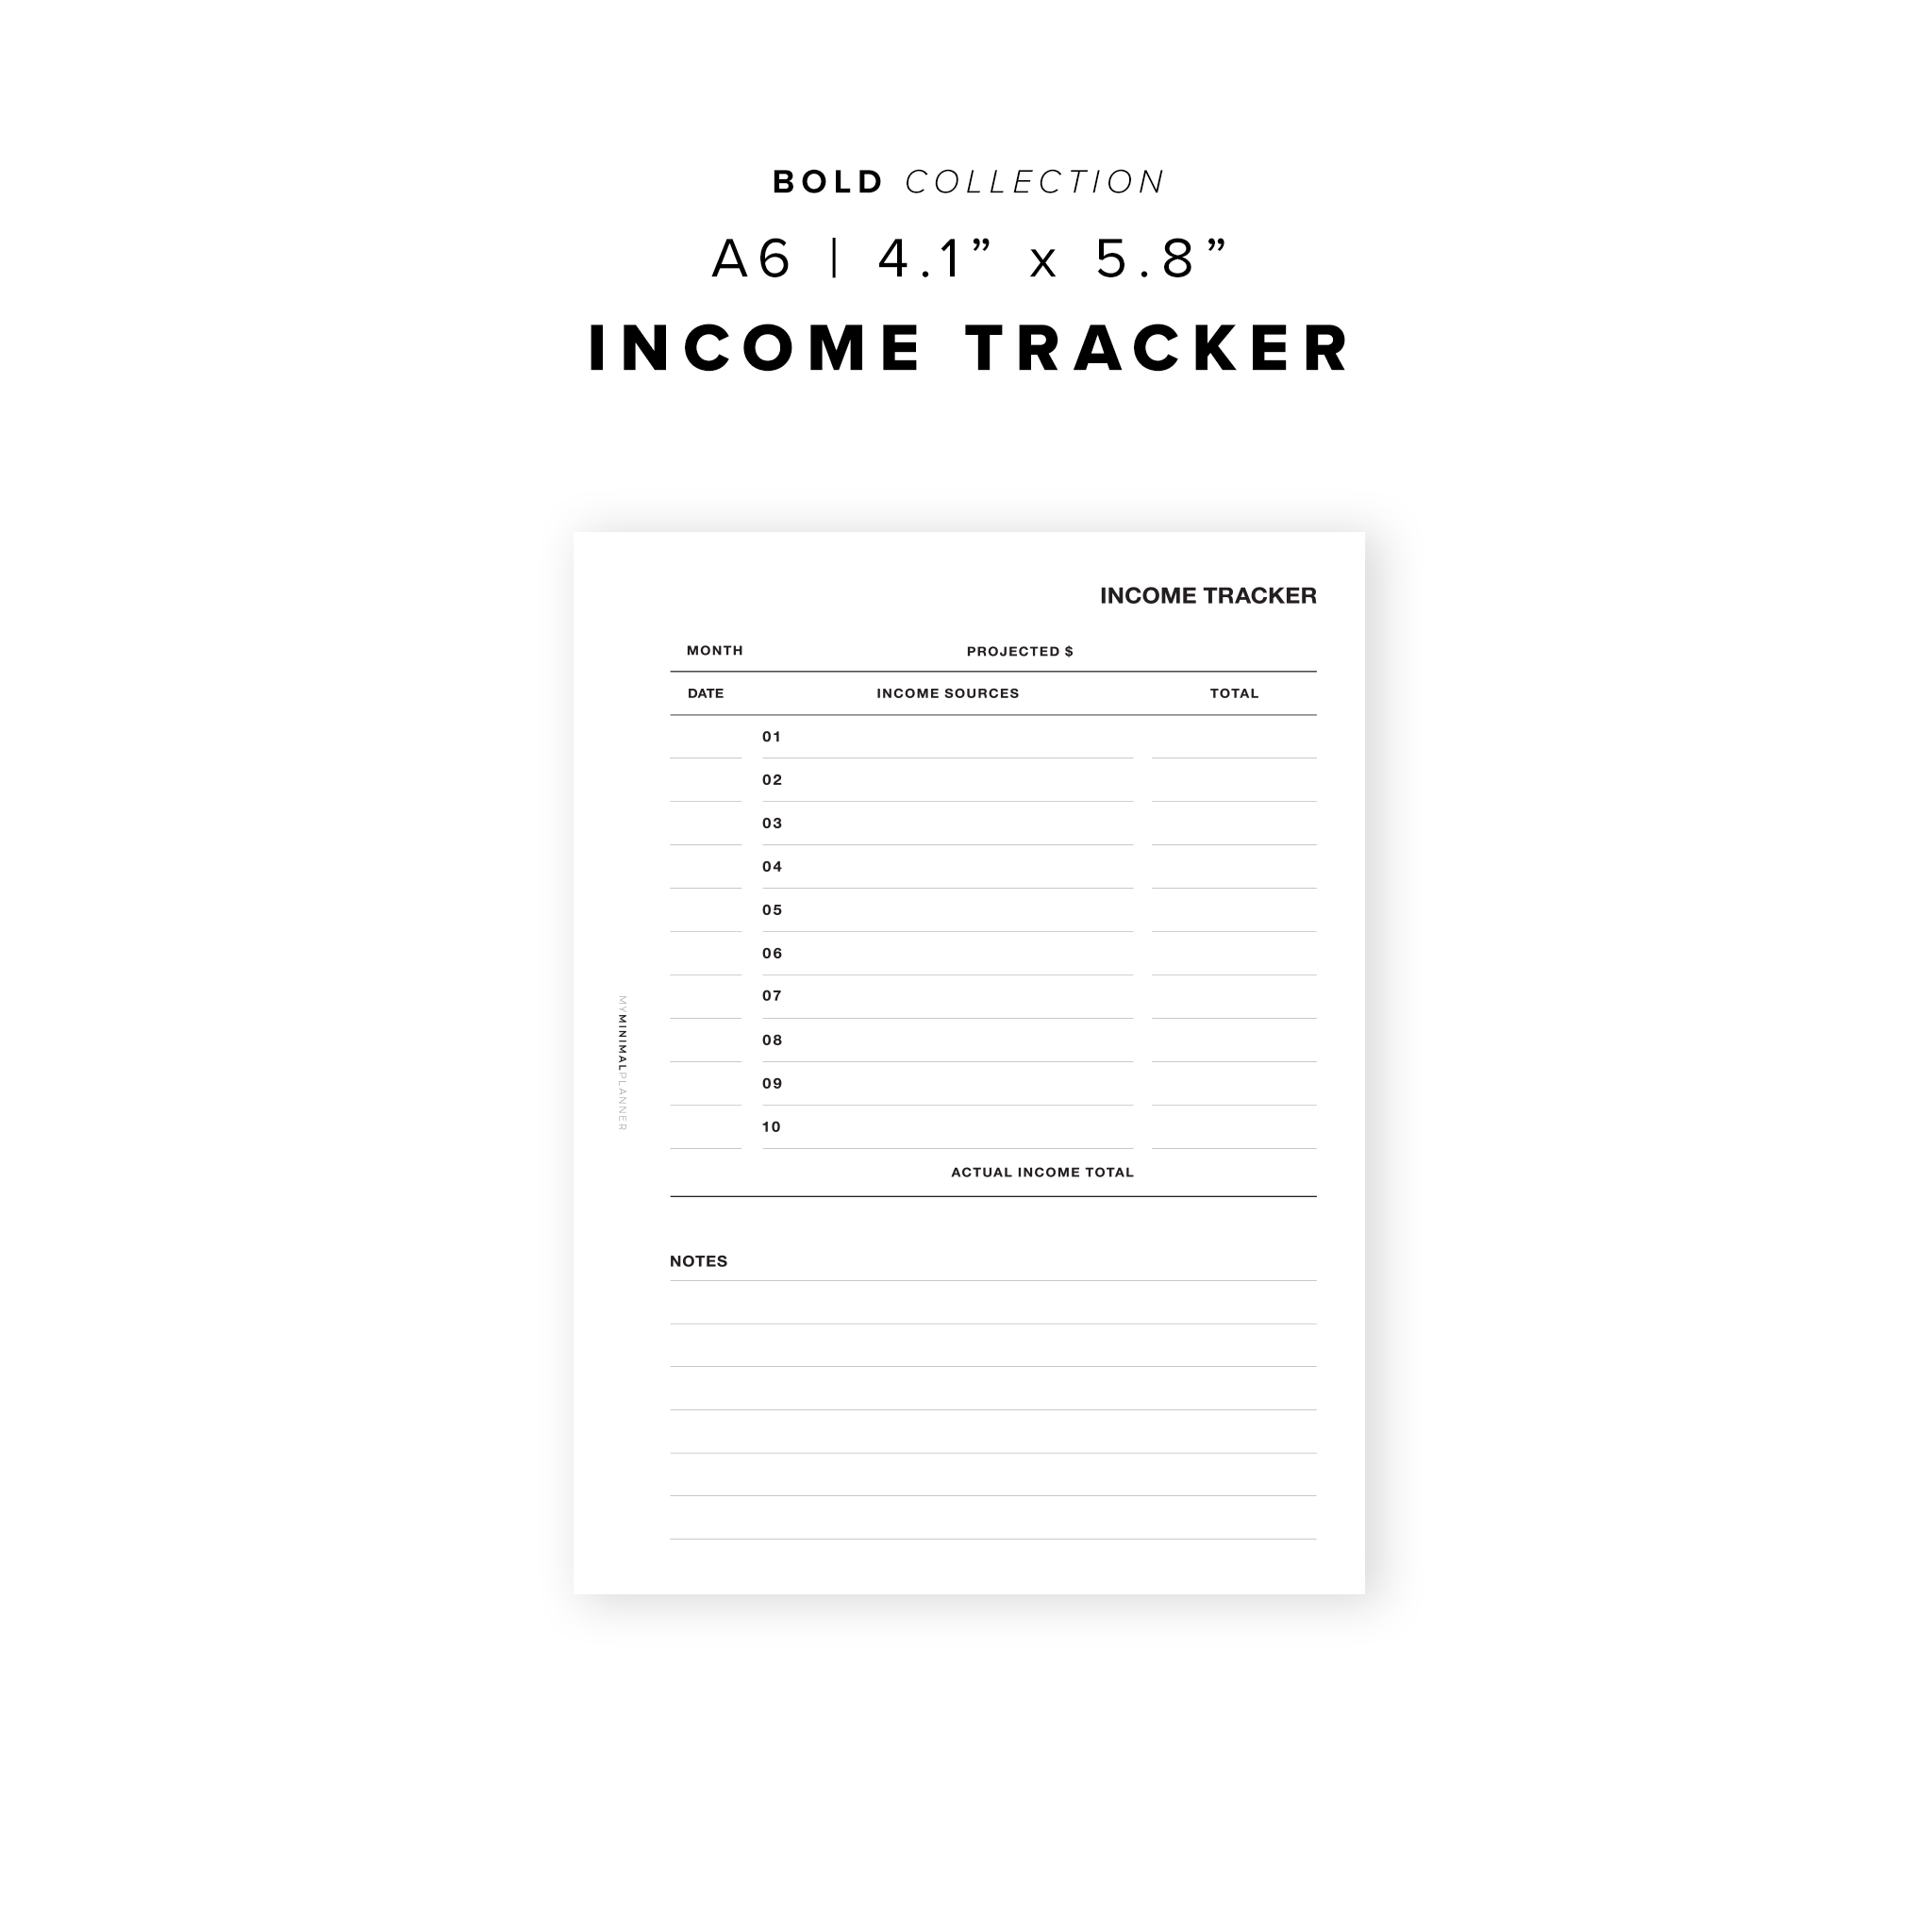 PR35 - Income Tracker - Bold Collection - Printable Insert